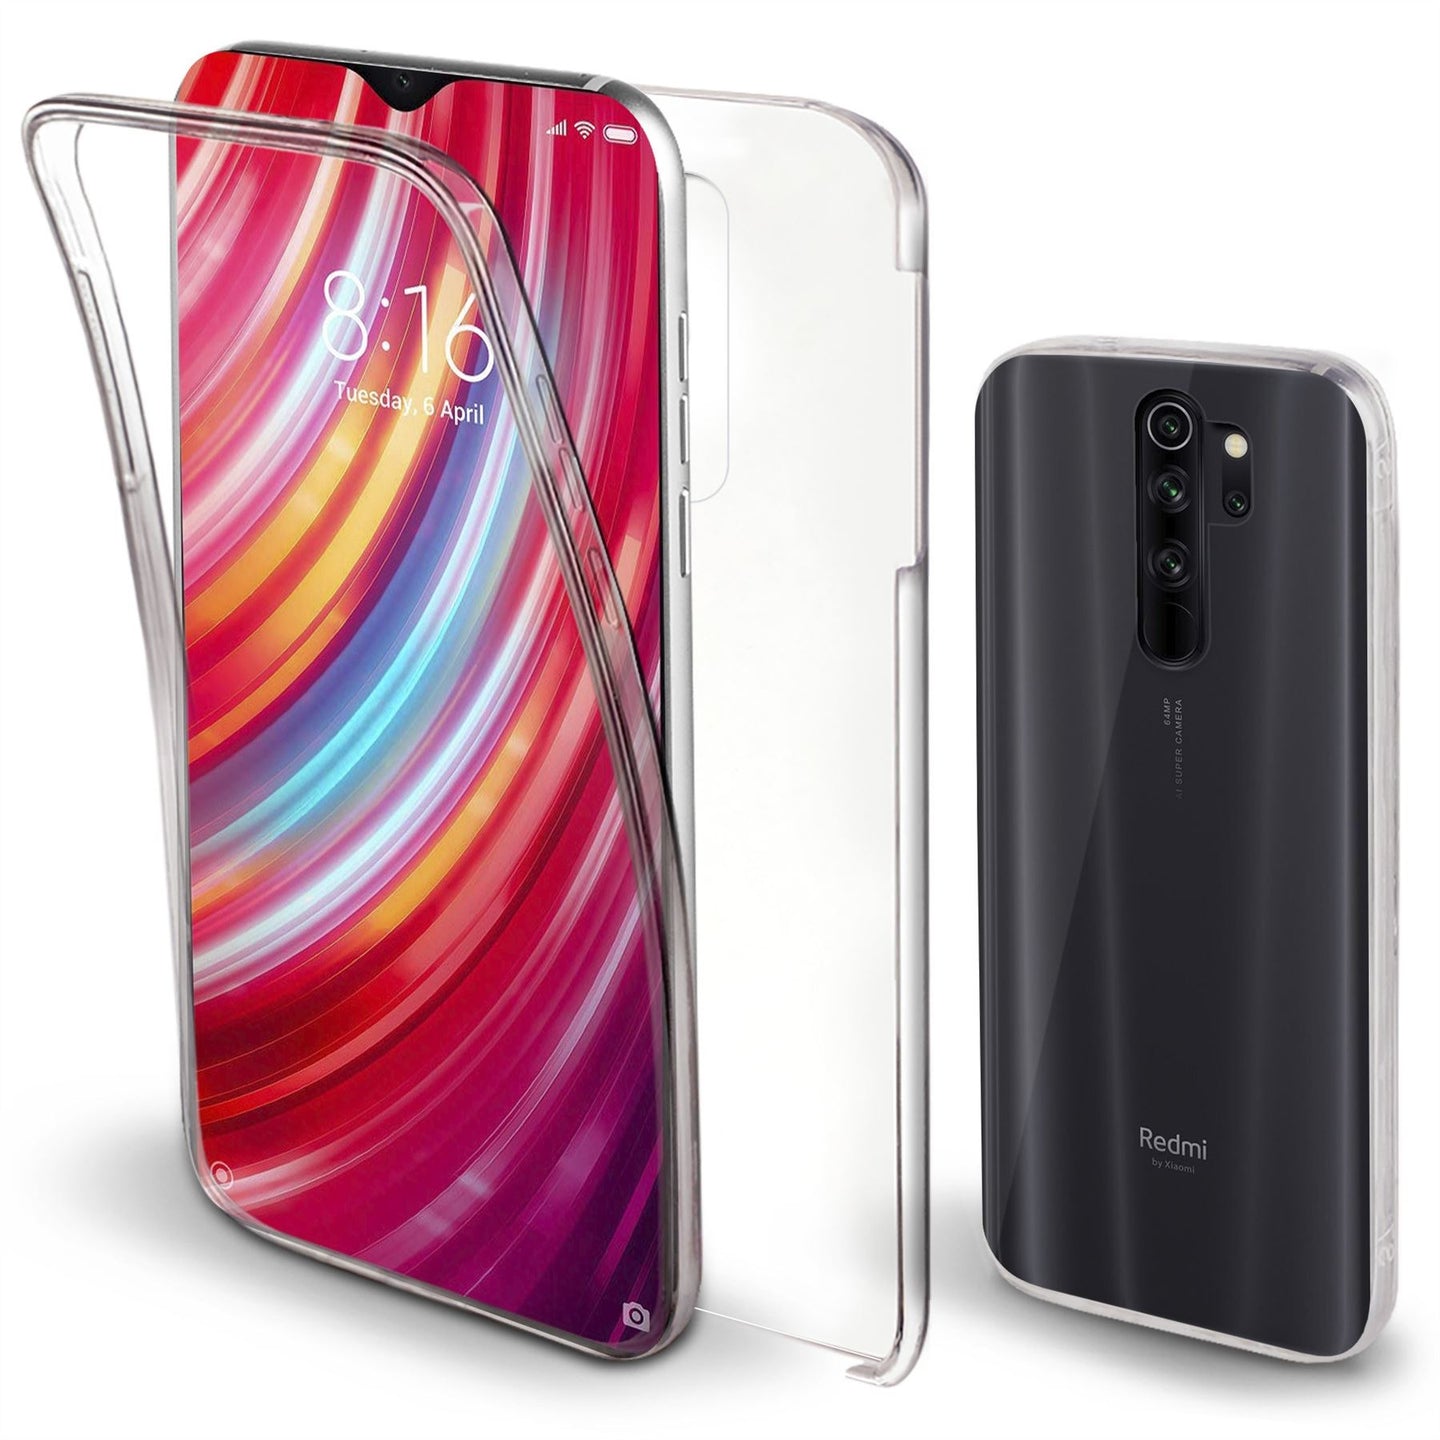 Moozy 360 Degree Case for Xiaomi Redmi Note 8 Pro - Transparent Full body Slim Cover - Hard PC Back and Soft TPU Silicone Front